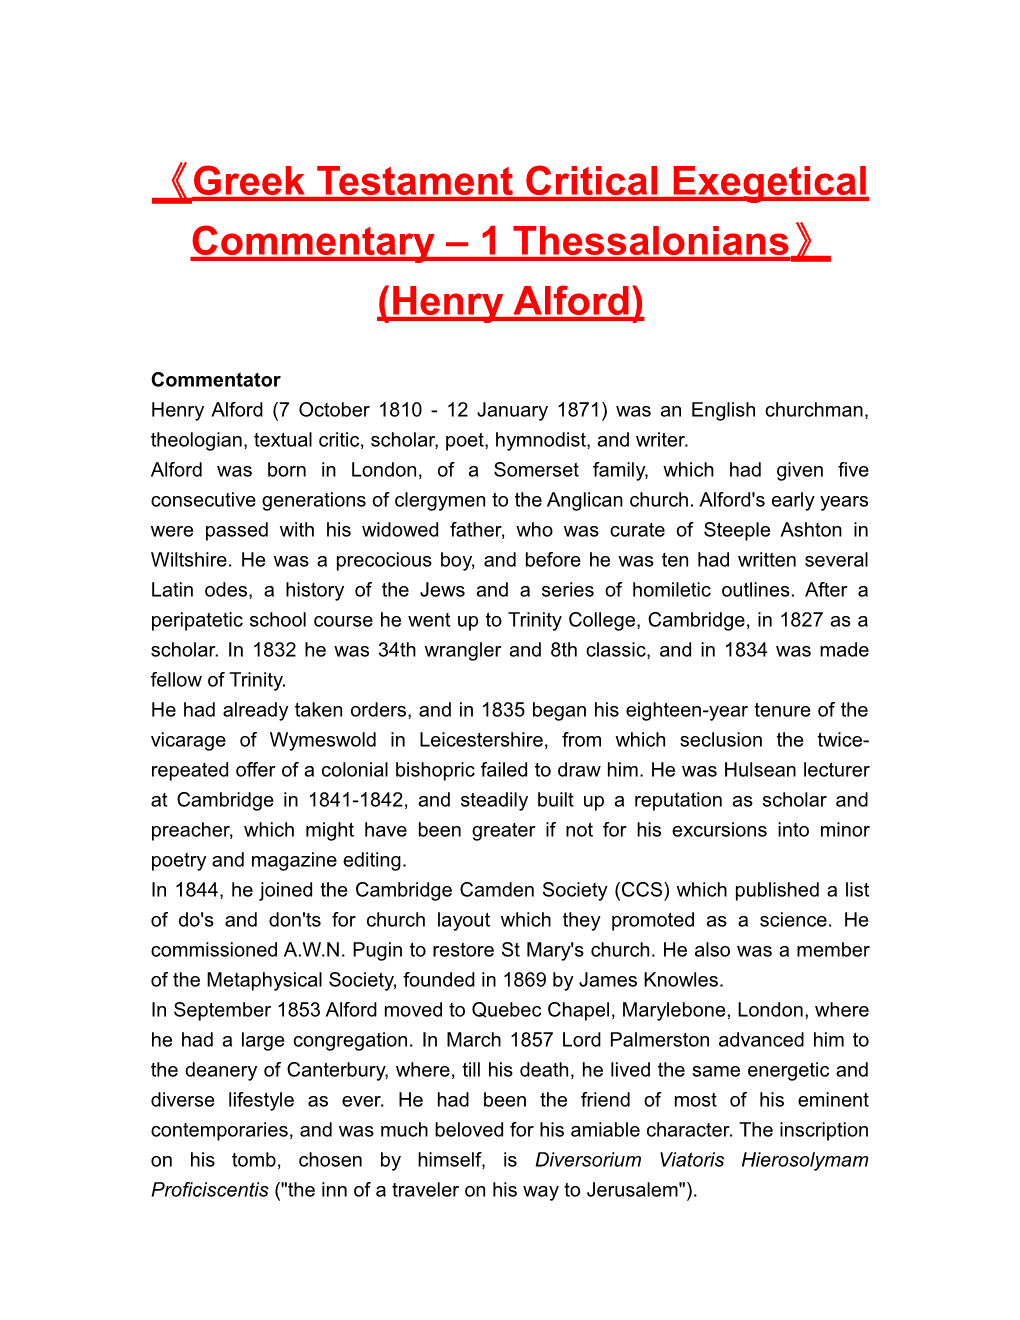 Greektestament Critical Exegetical Commentary 1 Thessalonians (Henry Alford)